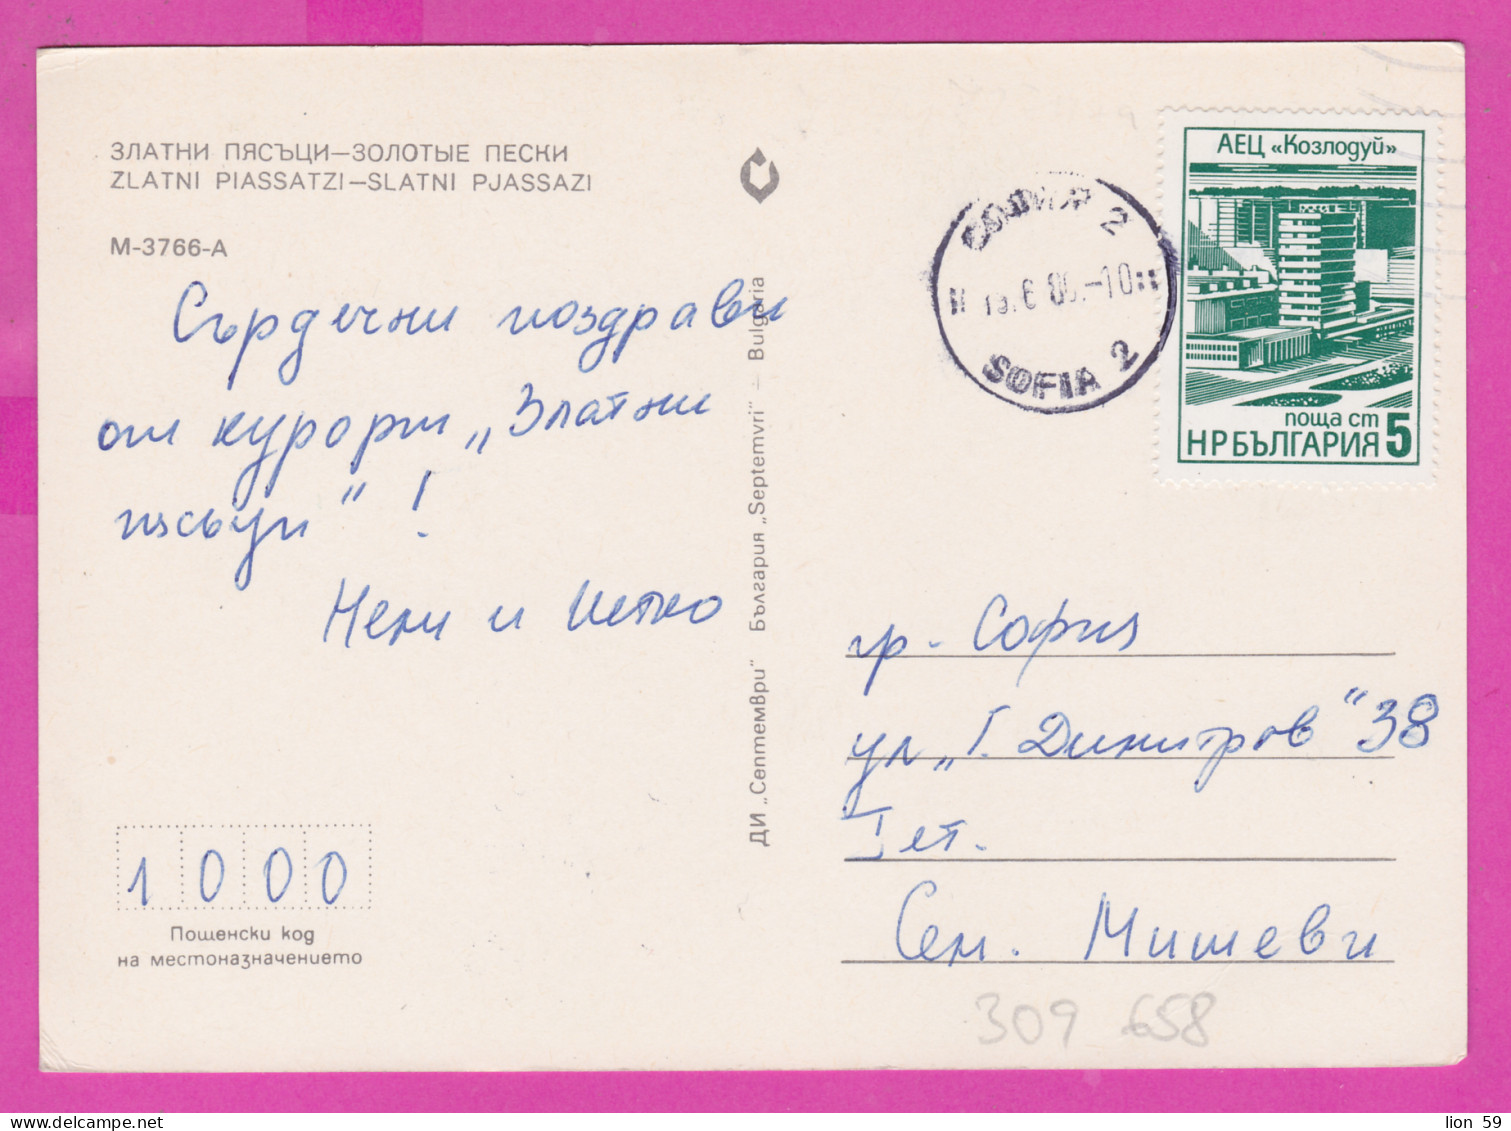 309658 / Bulgaria - Golden Sands (Varna) Night Hotels Black Sea Resort PC 1980 USED - 5 St Kozloduy Nuclear Power Plant - Lettres & Documents